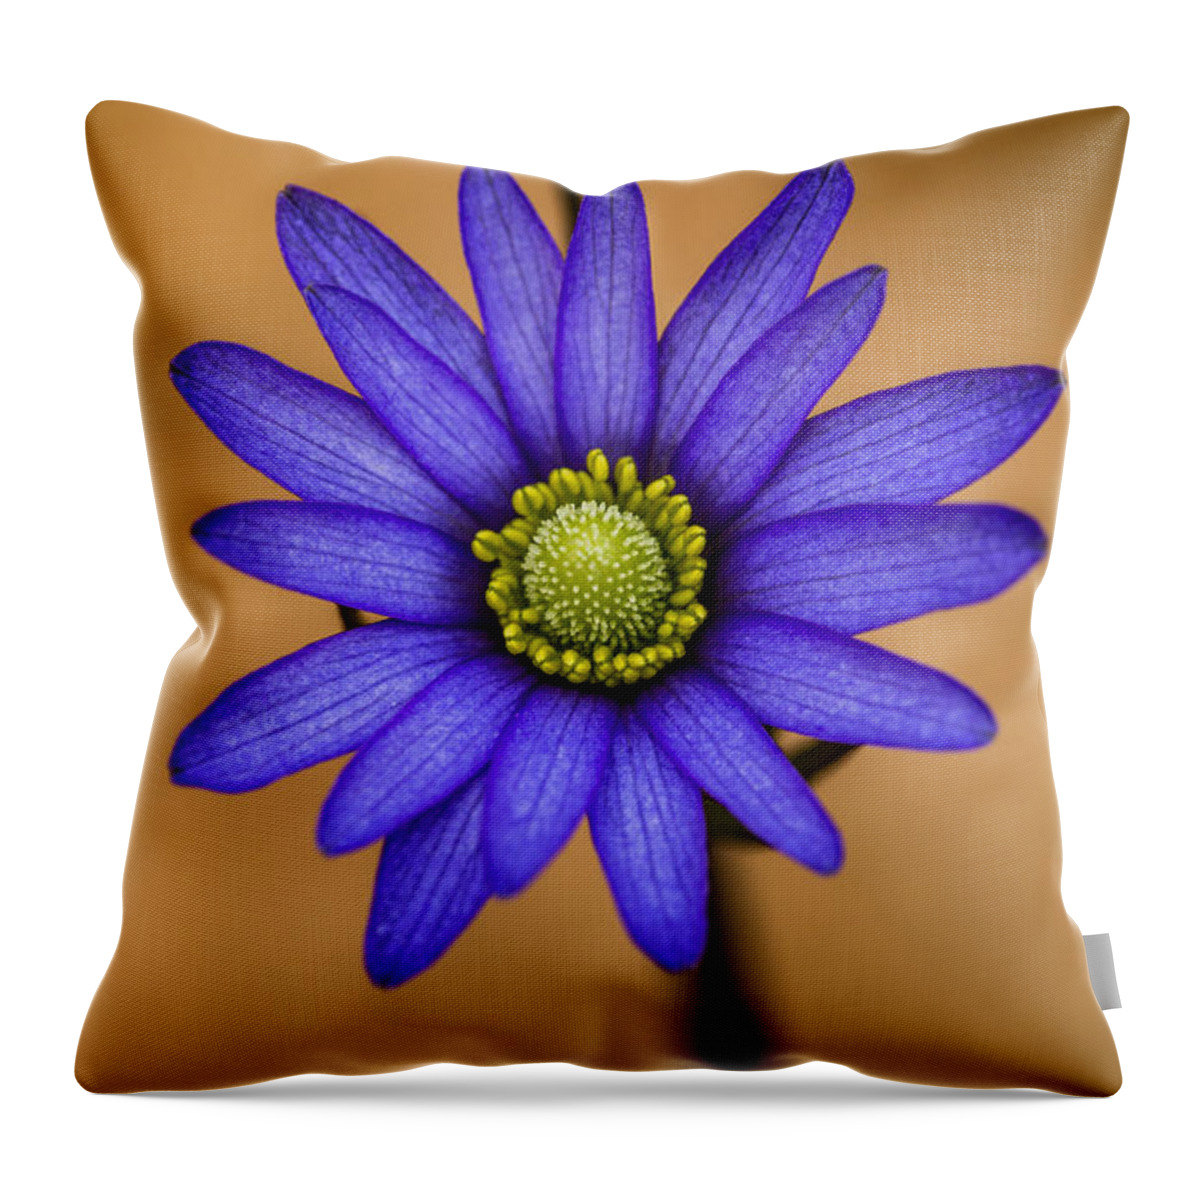 Anemone Throw Pillow featuring the photograph Purple Anemone by Steven Schwartzman